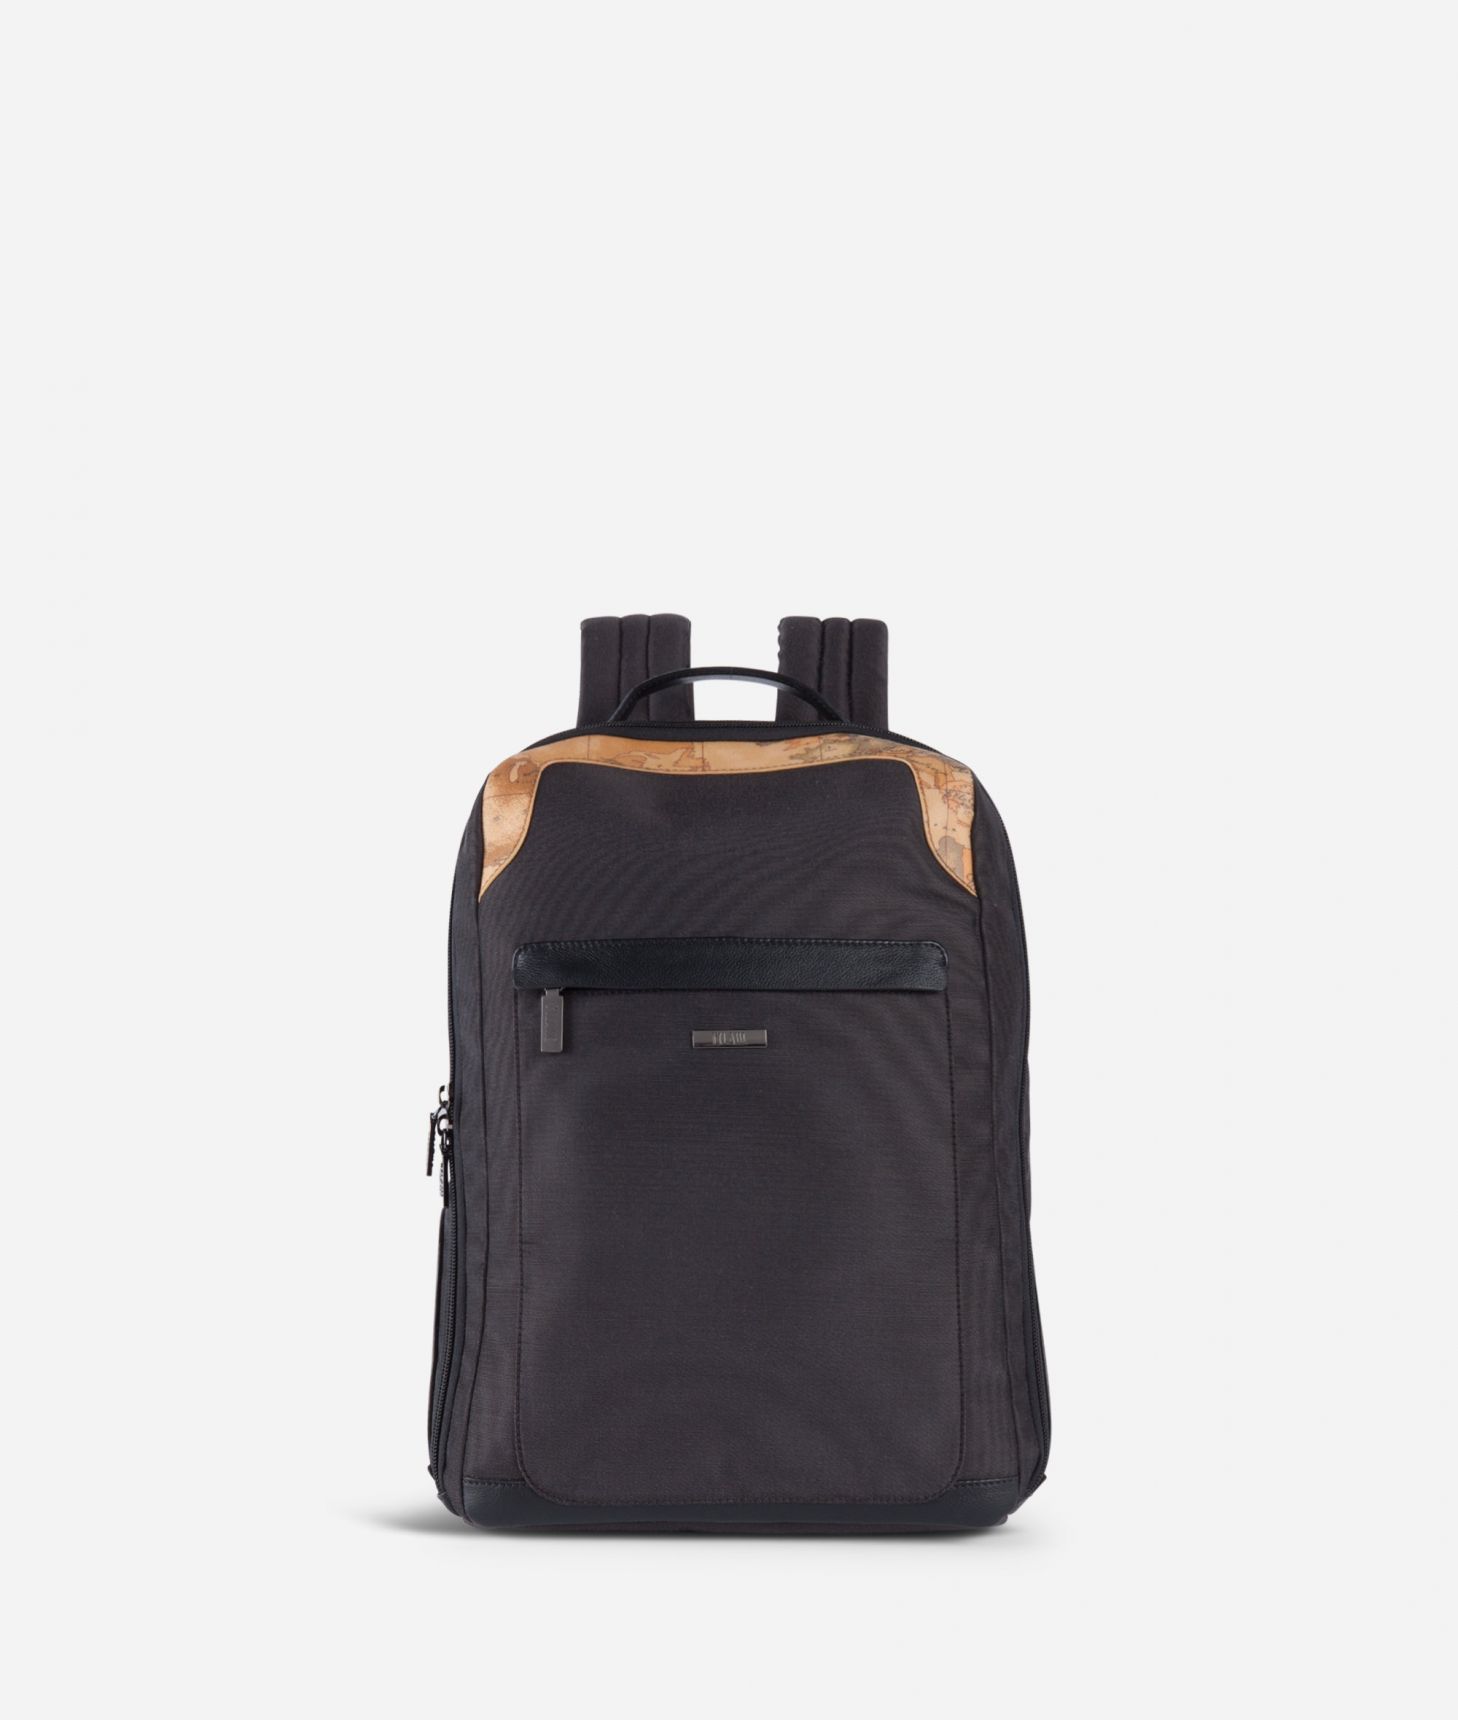 Geo Classic laptop backpack black,front